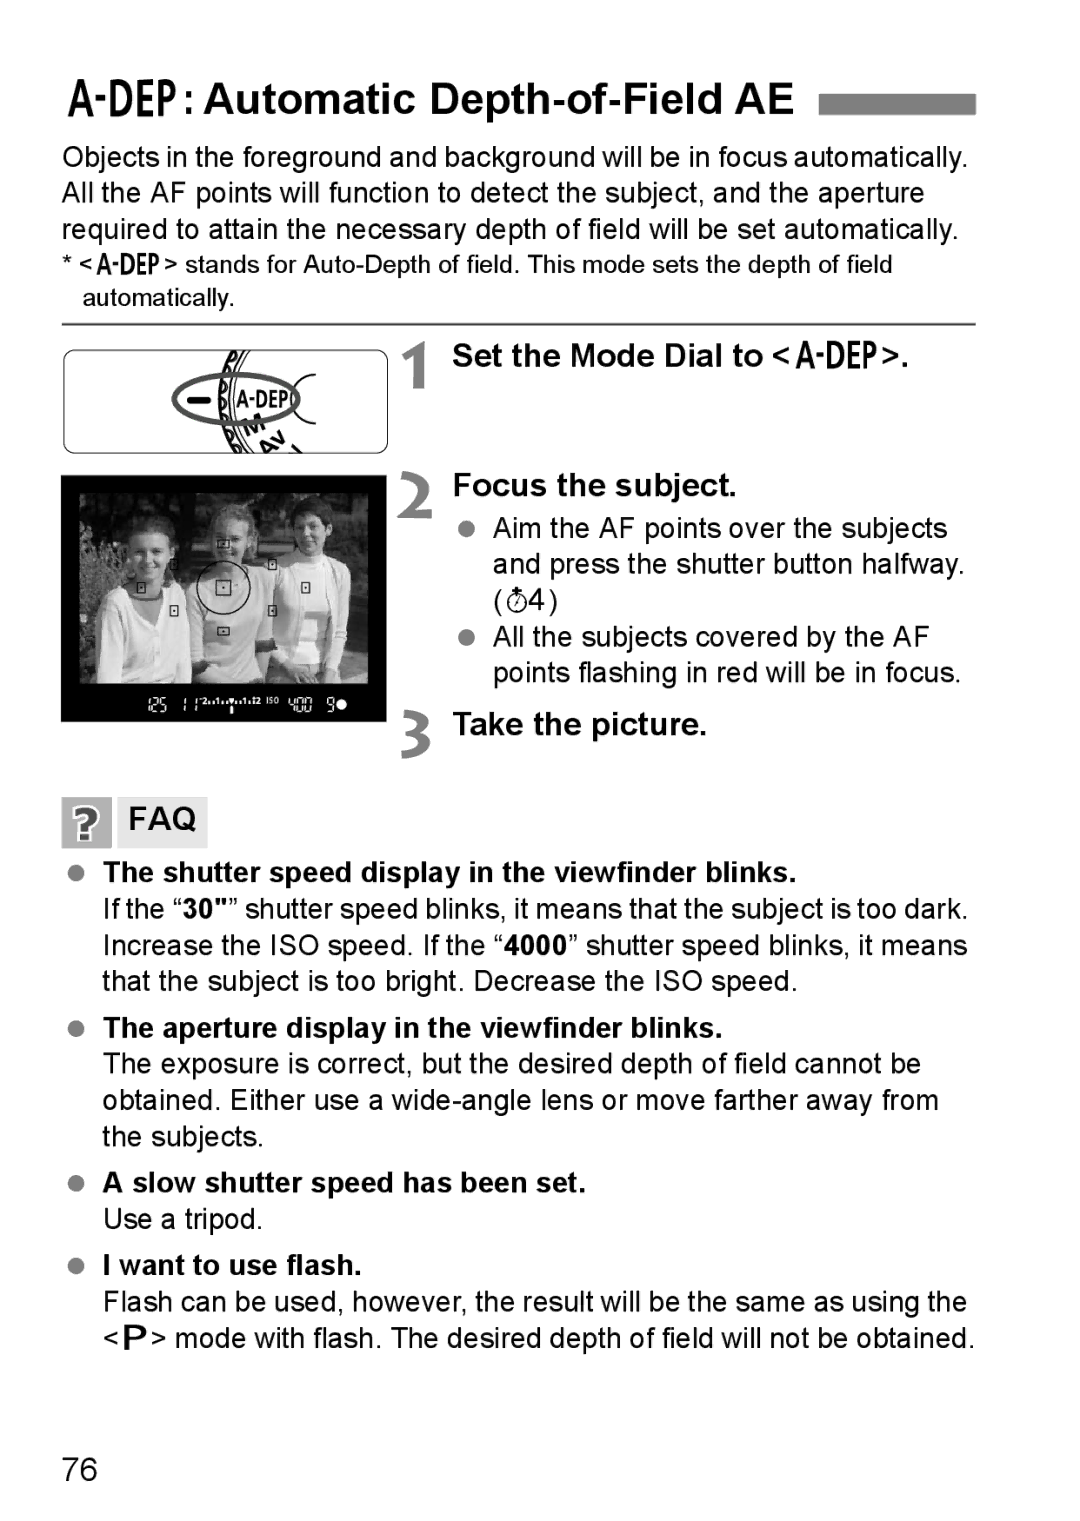 Canon EOS 450D instruction manual Automatic Depth-of-Field AE, Set the Mode Dial to Focus the subject 